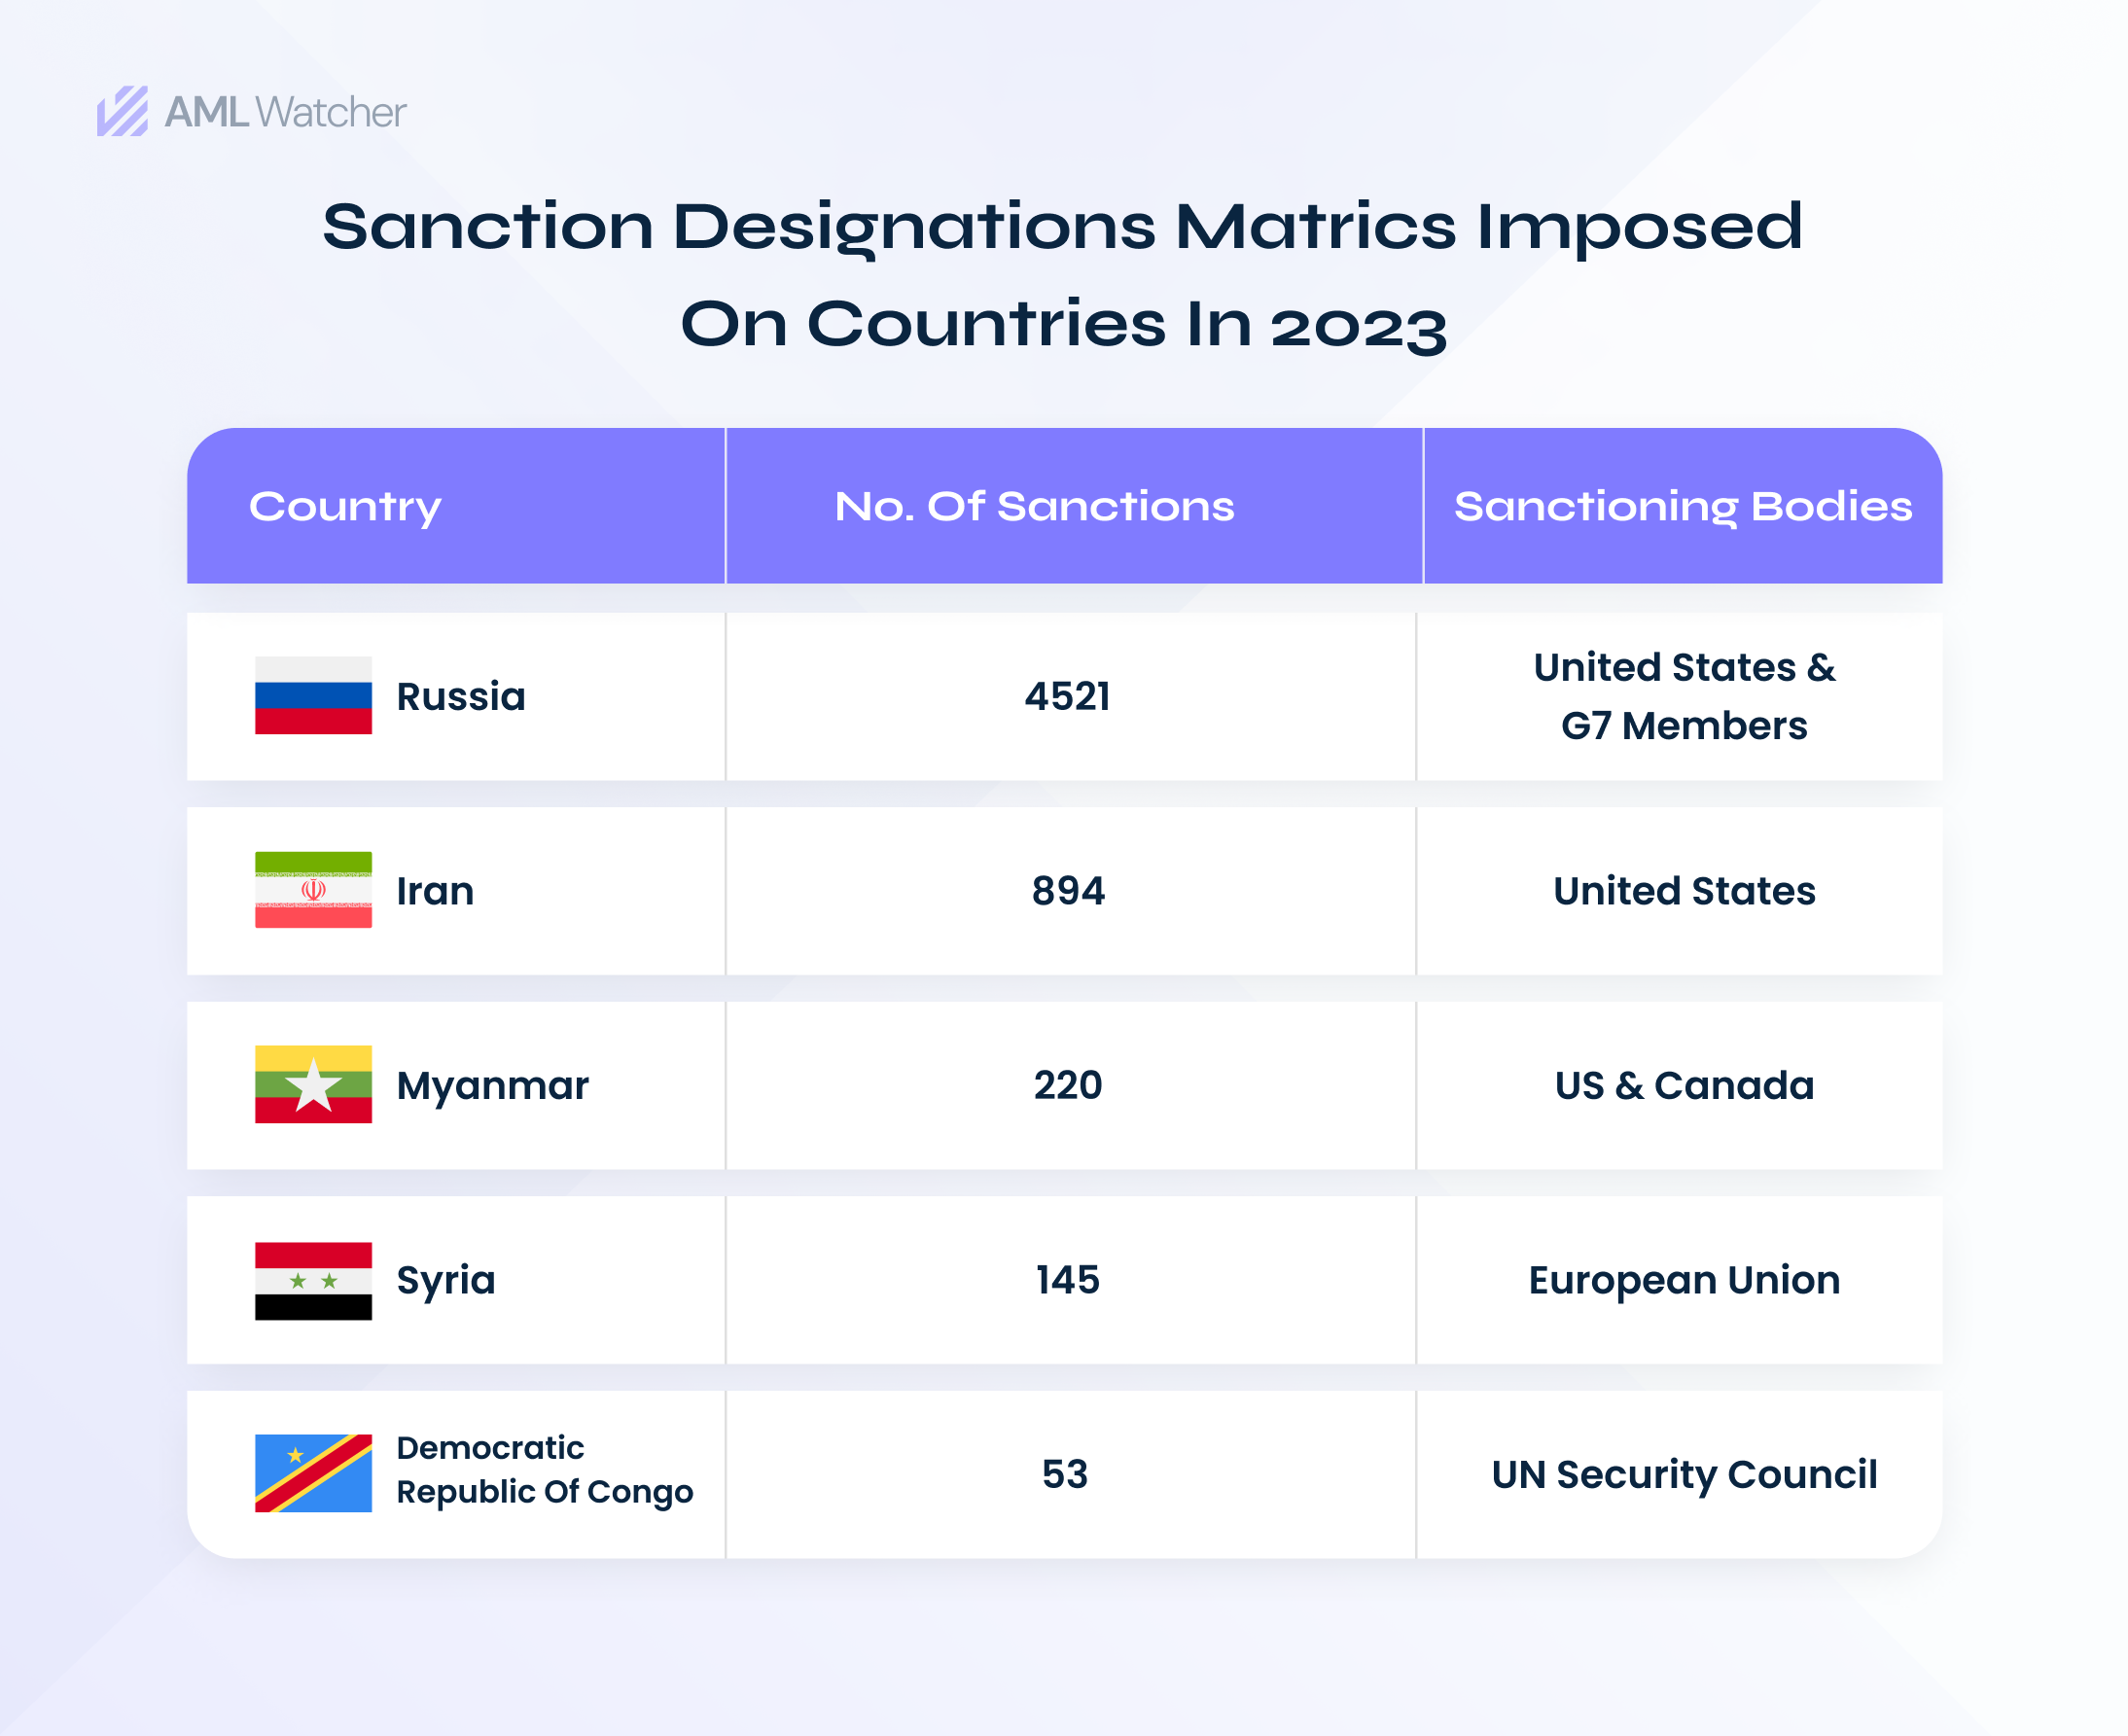 the featured image displays the list of countries and number of sanctions imposed on them in the year 2023.